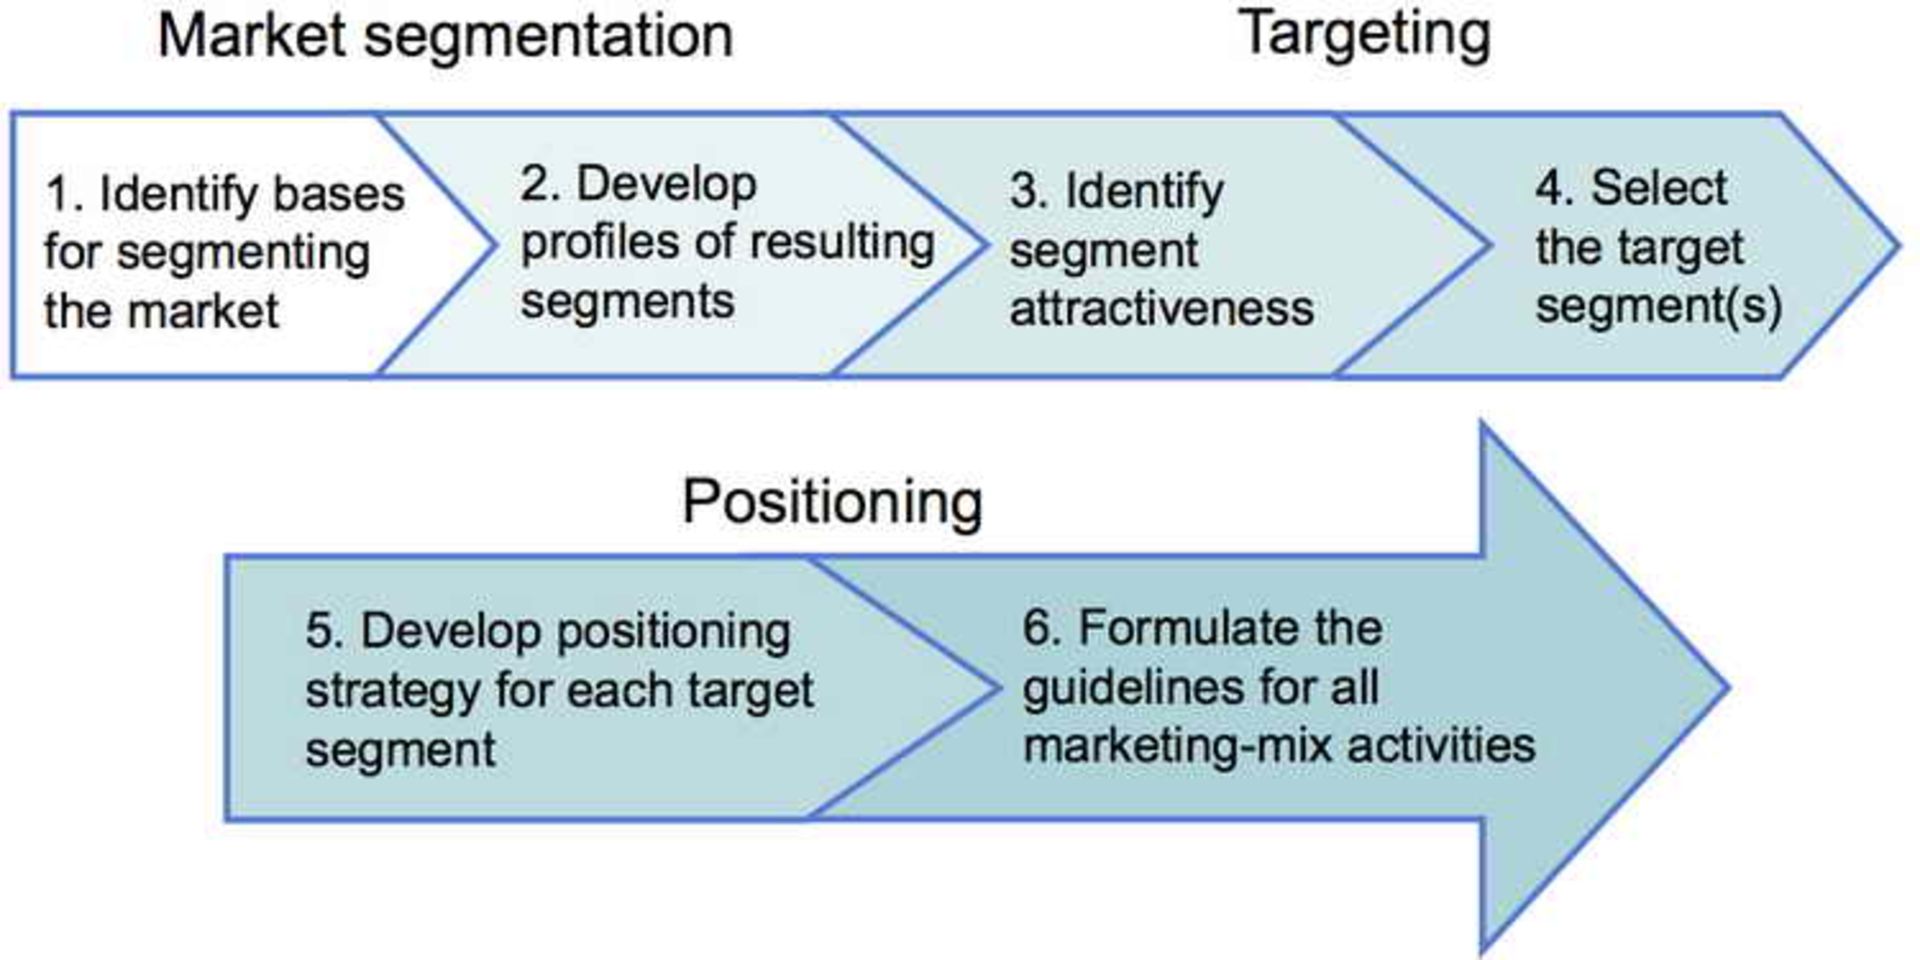 The Segmentation, Targeting and Positioning model